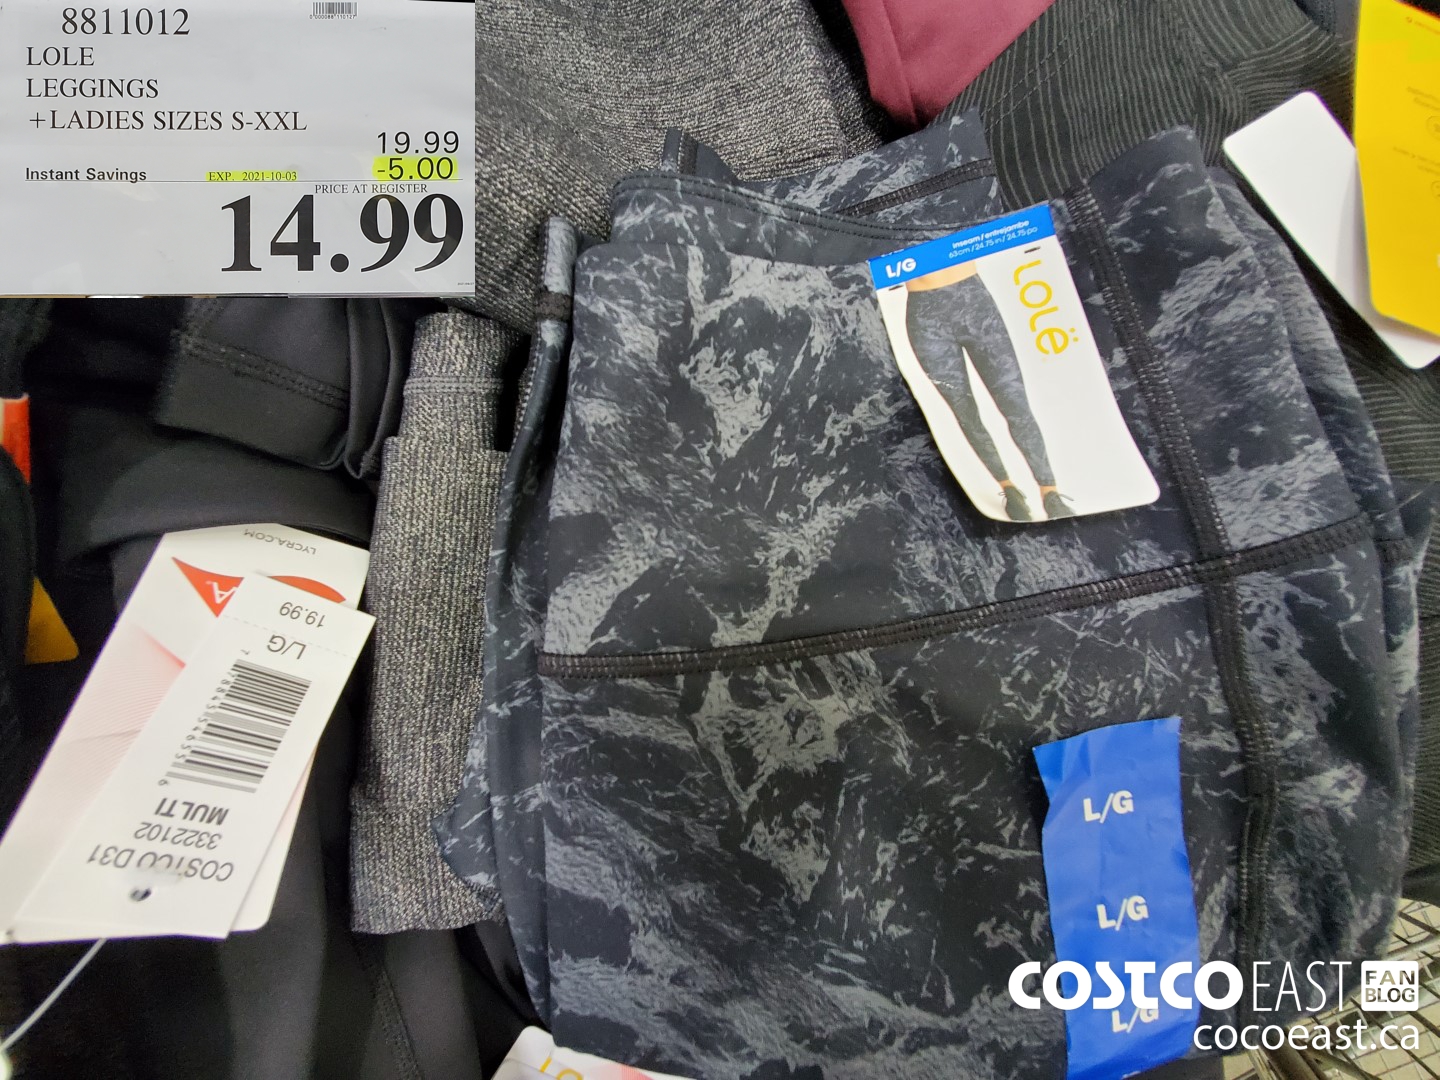 LOLE LEGGINGS +LADIES SIZES S-XXL at Costco 3180 Laird Rd Mississauga &  Oakville